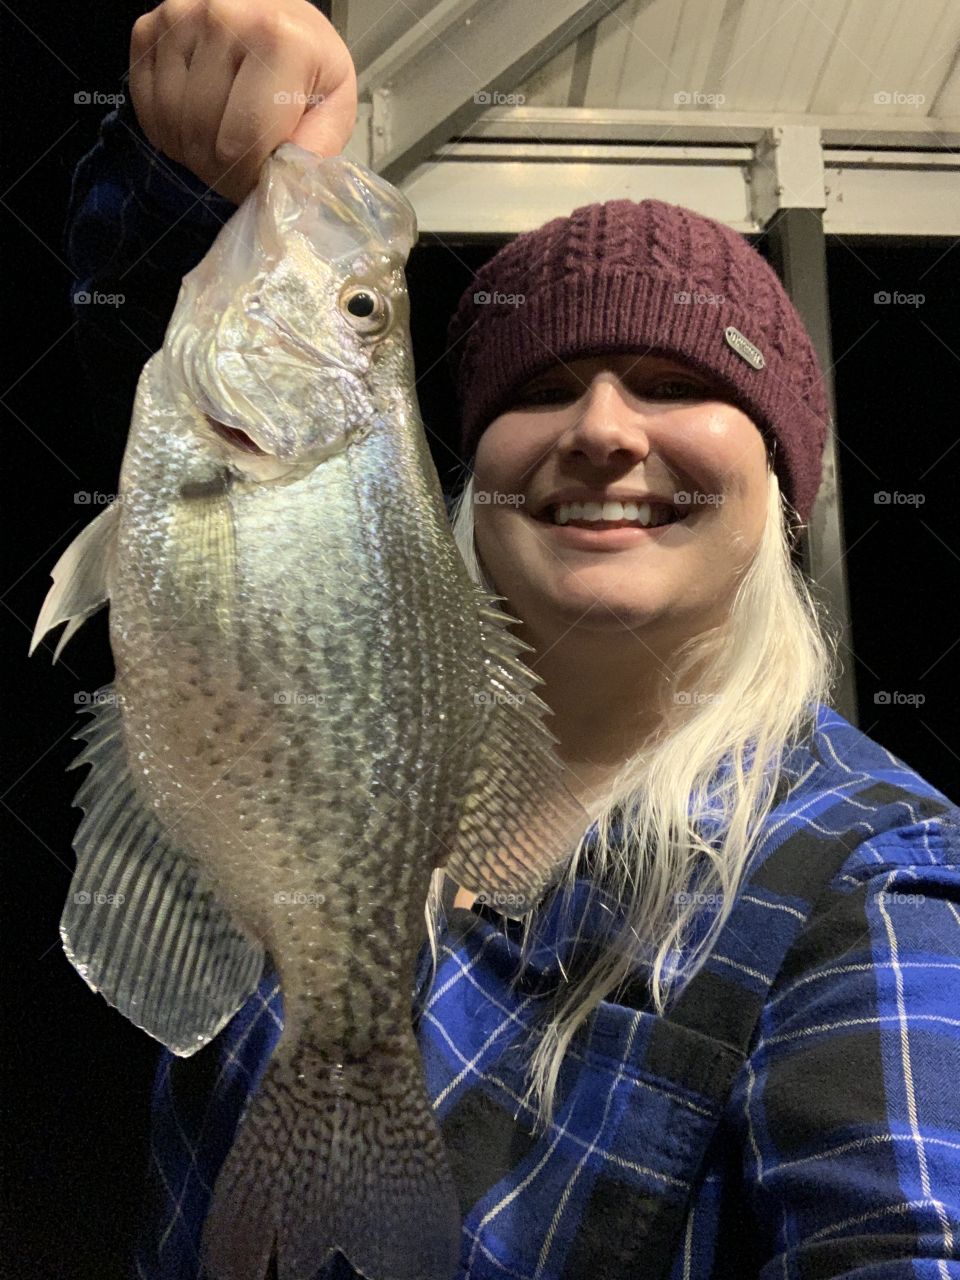 Fishing for crappie at night time 